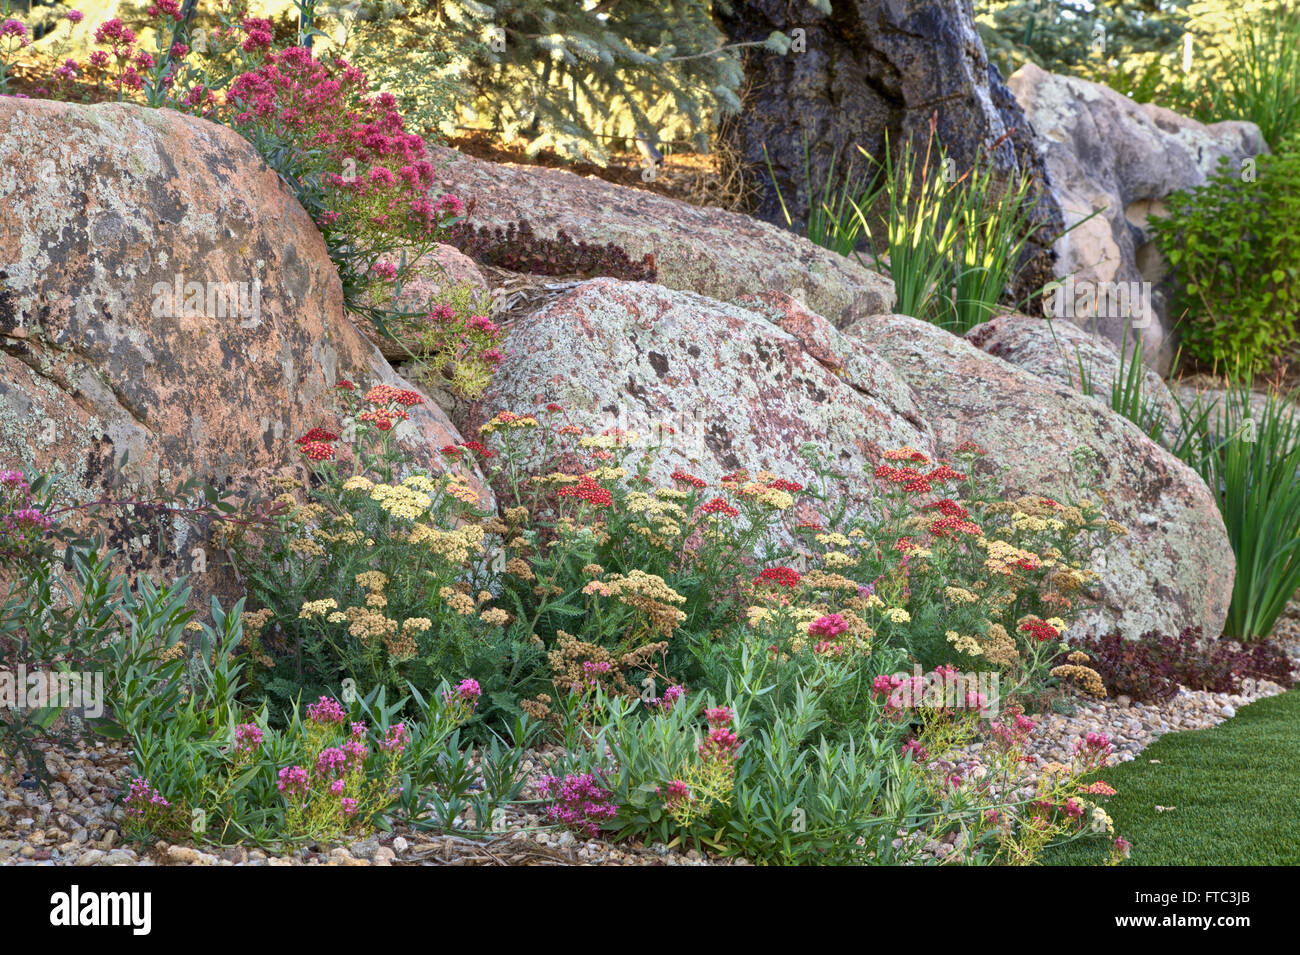 Perennial plants blossoming around large lichen covered boulders Stock Photo